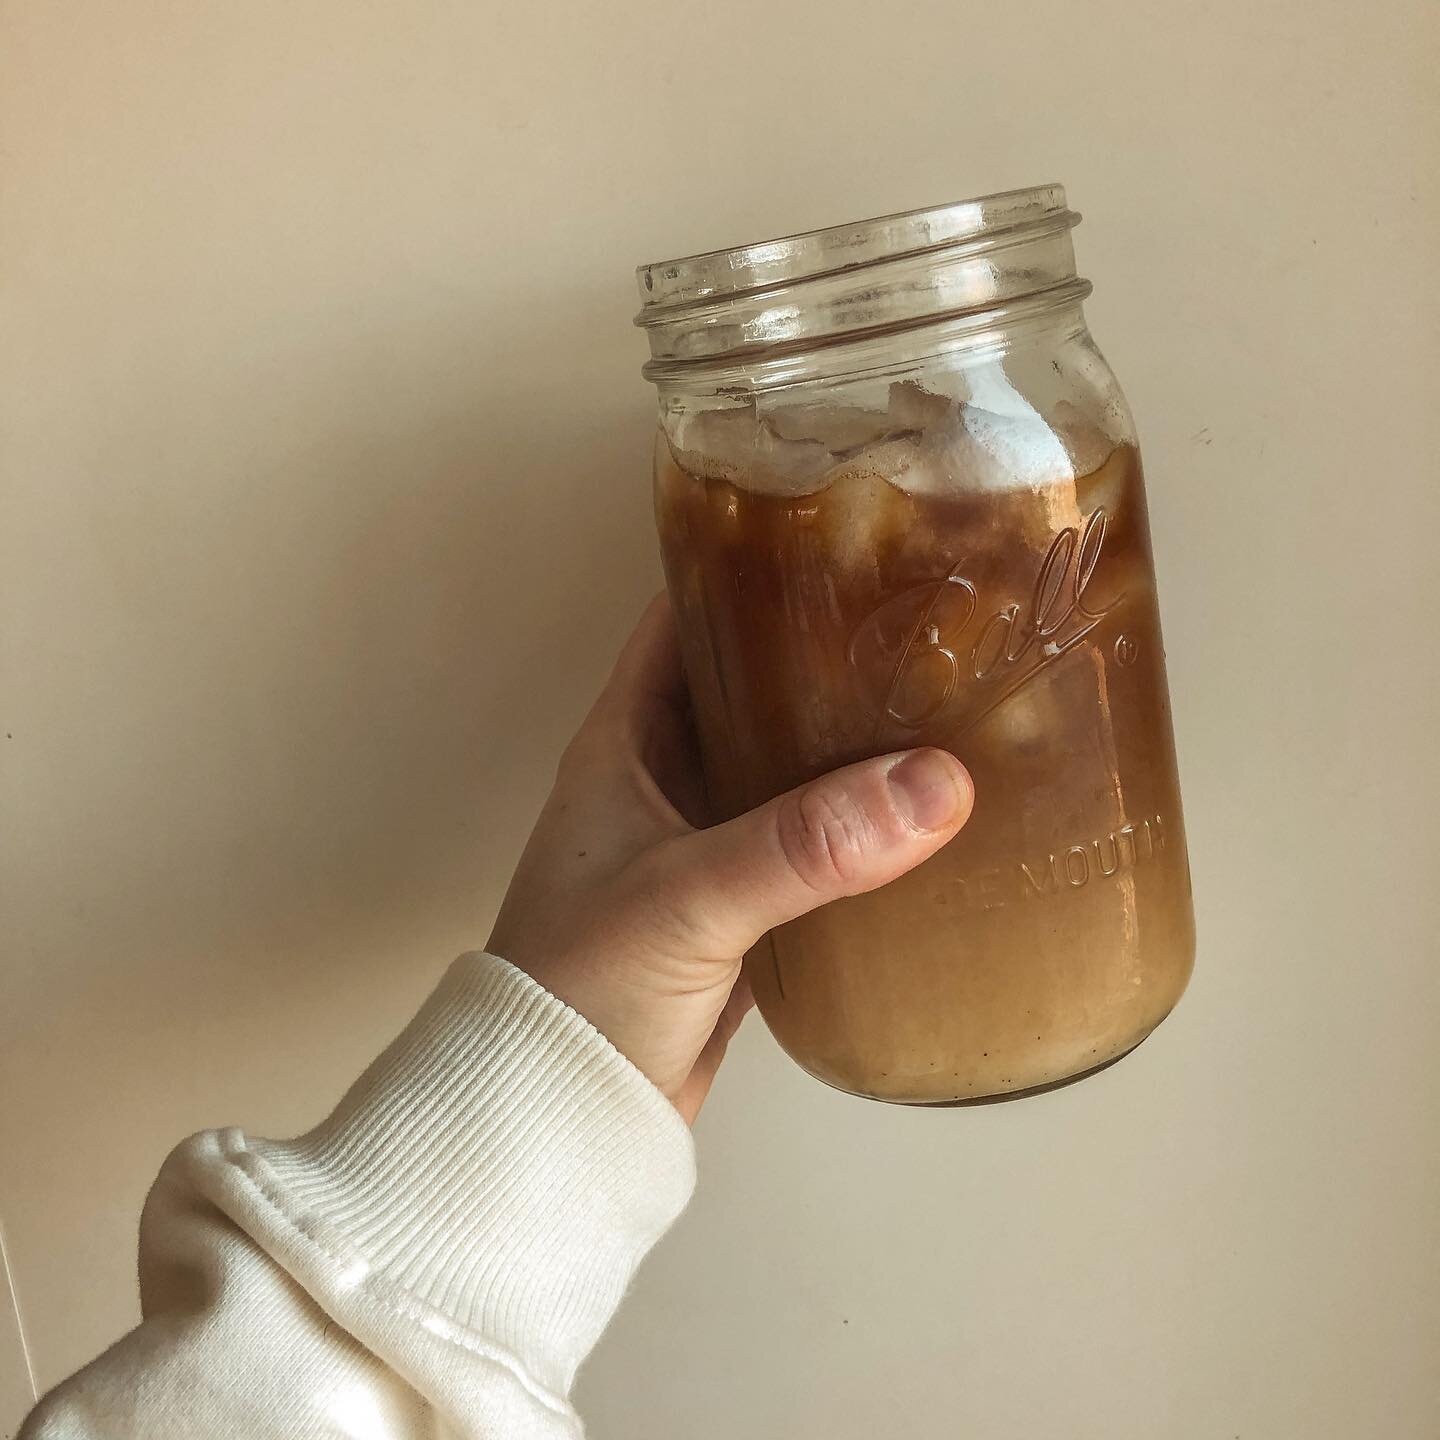 Are you even awake of you don&rsquo;t drink an entire mason jar of cold brew (with oat milk)!?
.
.
.
#coffeelover #coldbrew #coffee #doritjaffe #goodmorning #irvingfarm